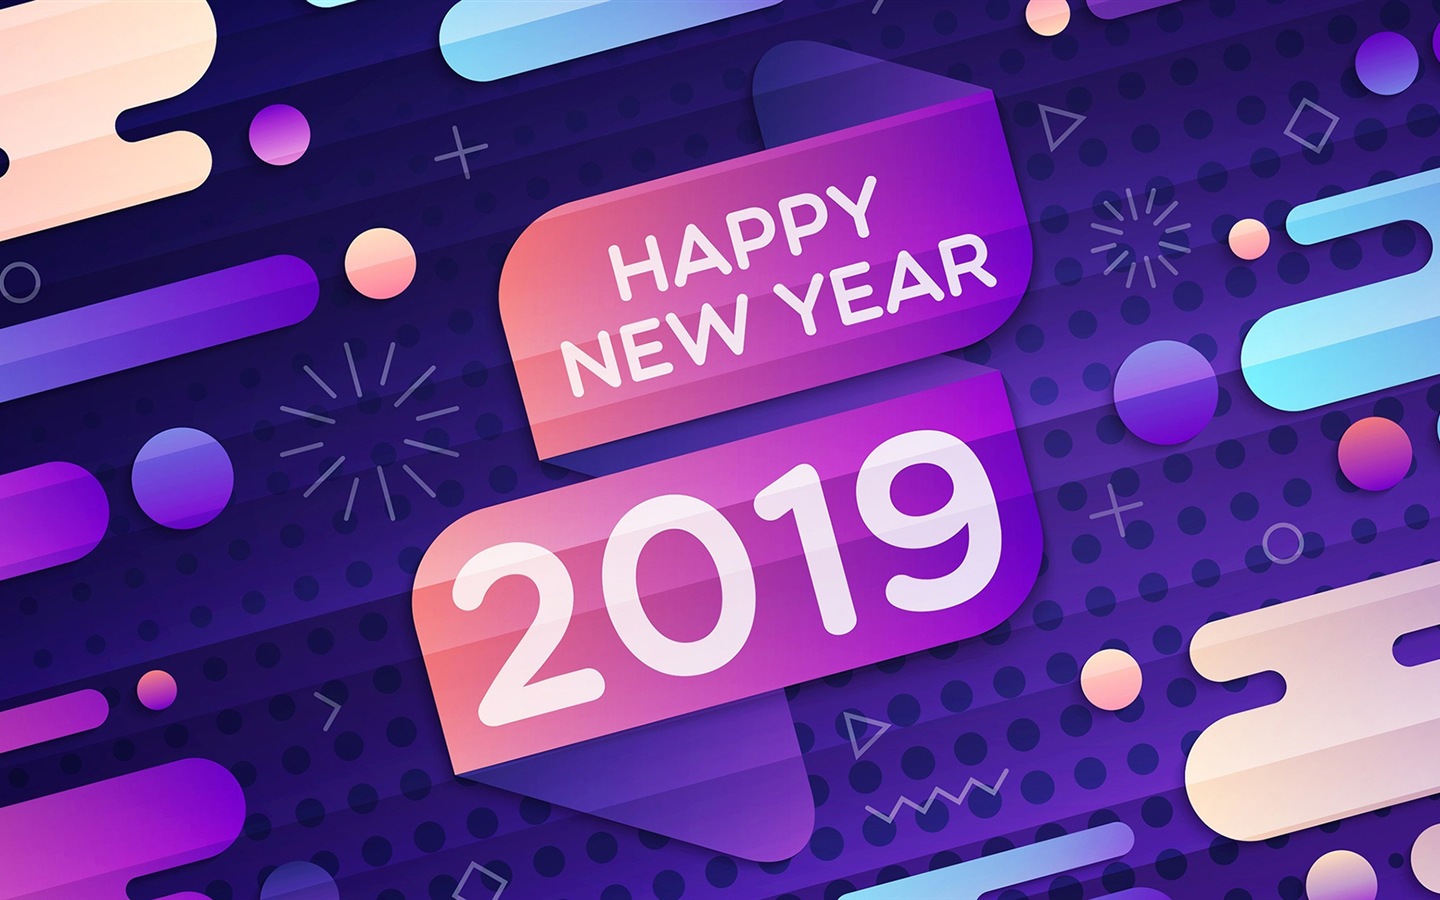 Happy New Year 2019 HD wallpapers #10 - 1440x900